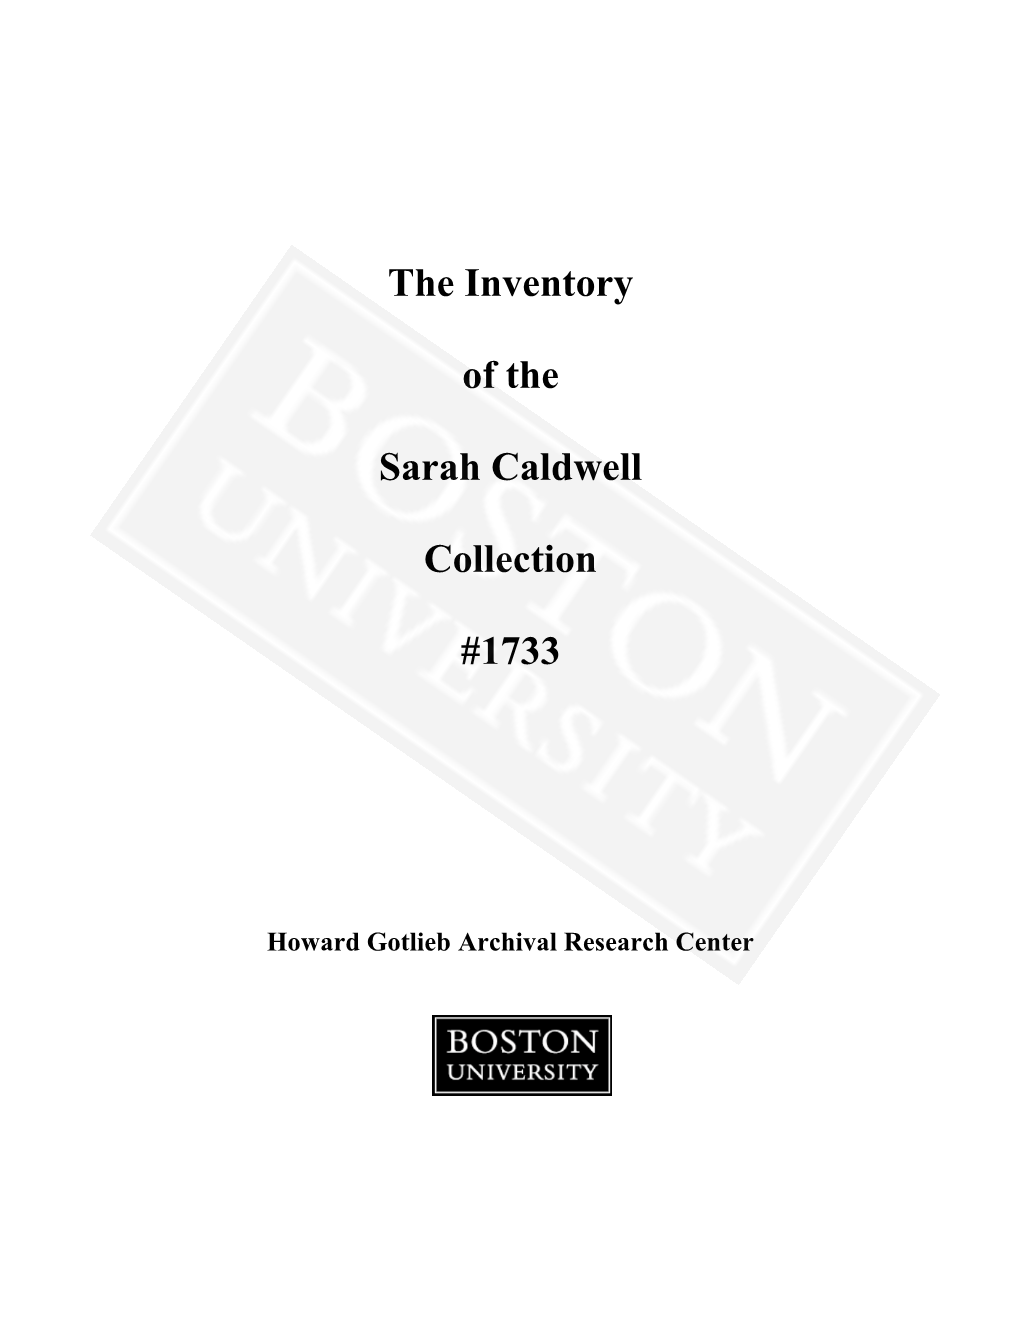 The Inventory of the Sarah Caldwell Collection #1733